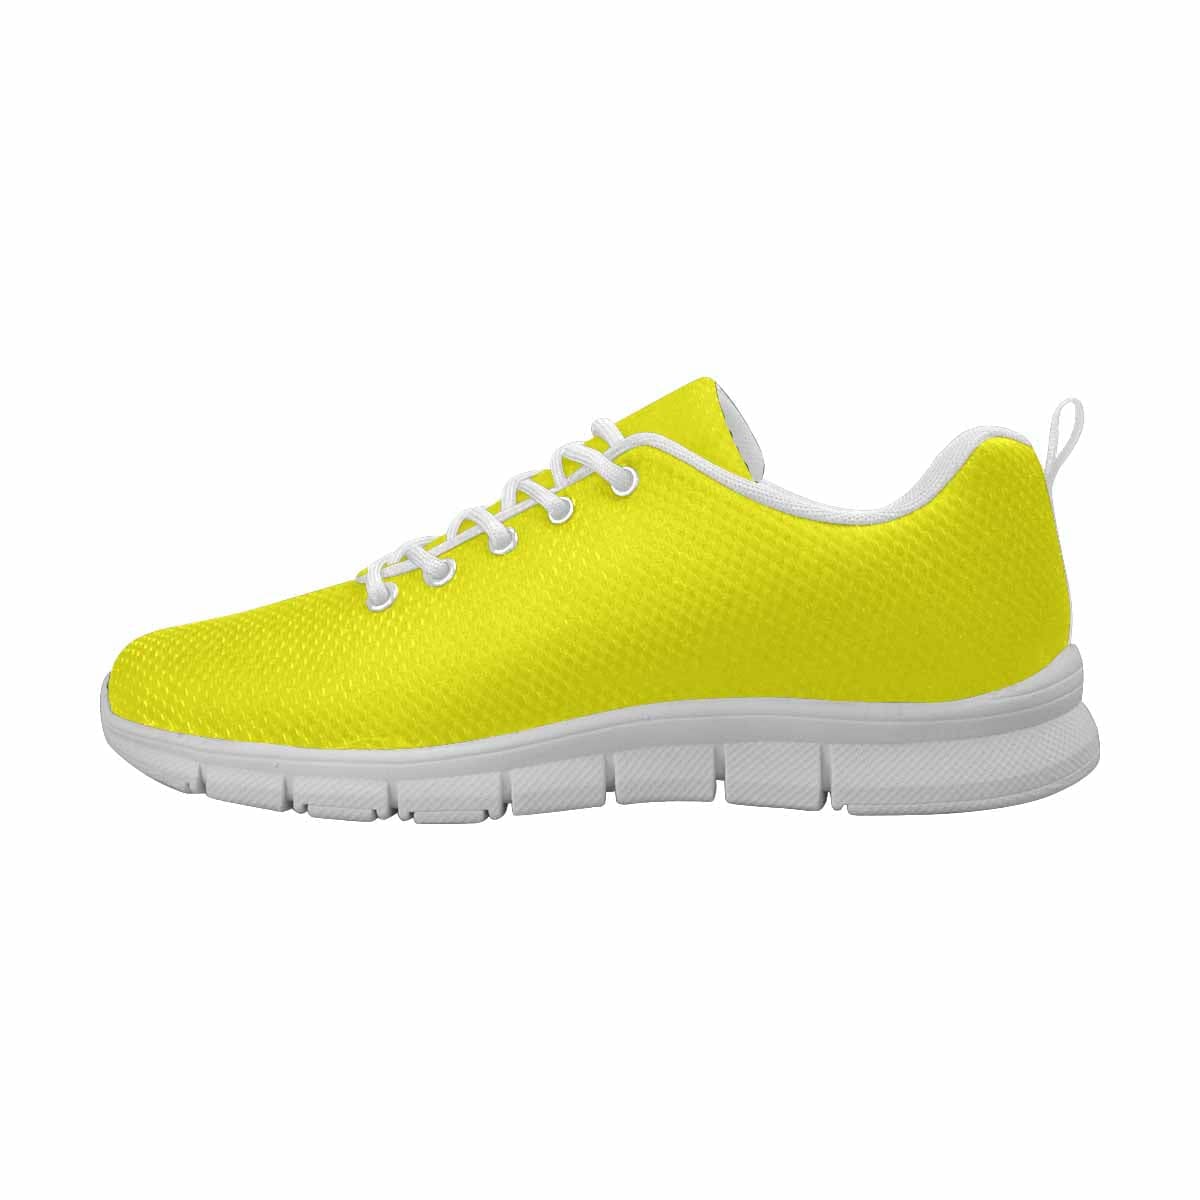 Sneakers For Men Bright Yellow - Running Shoes - Mens | Sneakers | Running